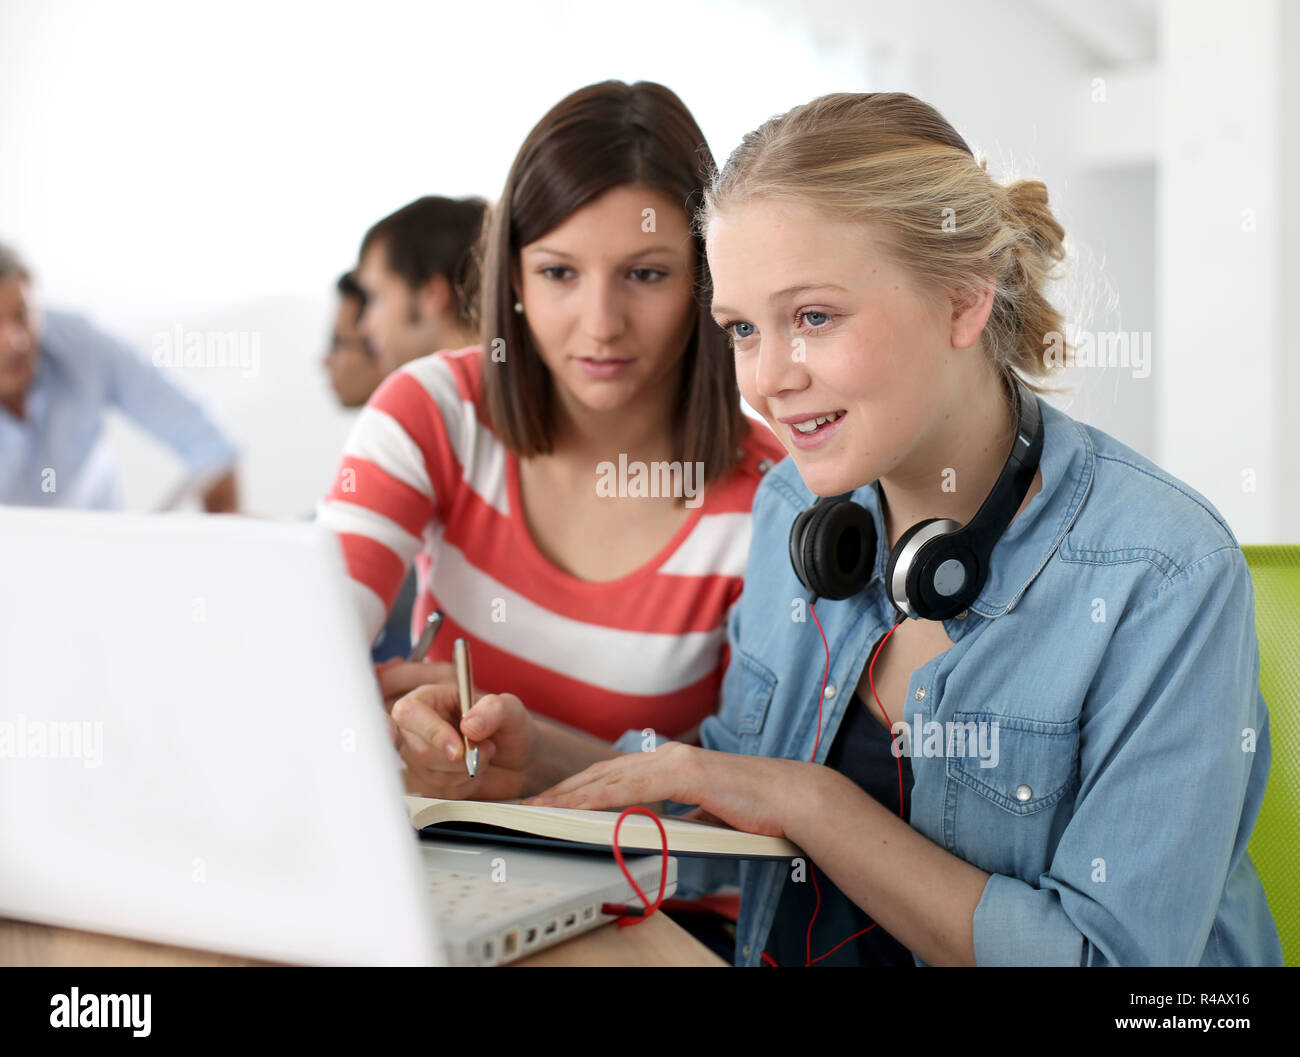 Students girls studying together on laptop Stock Photo